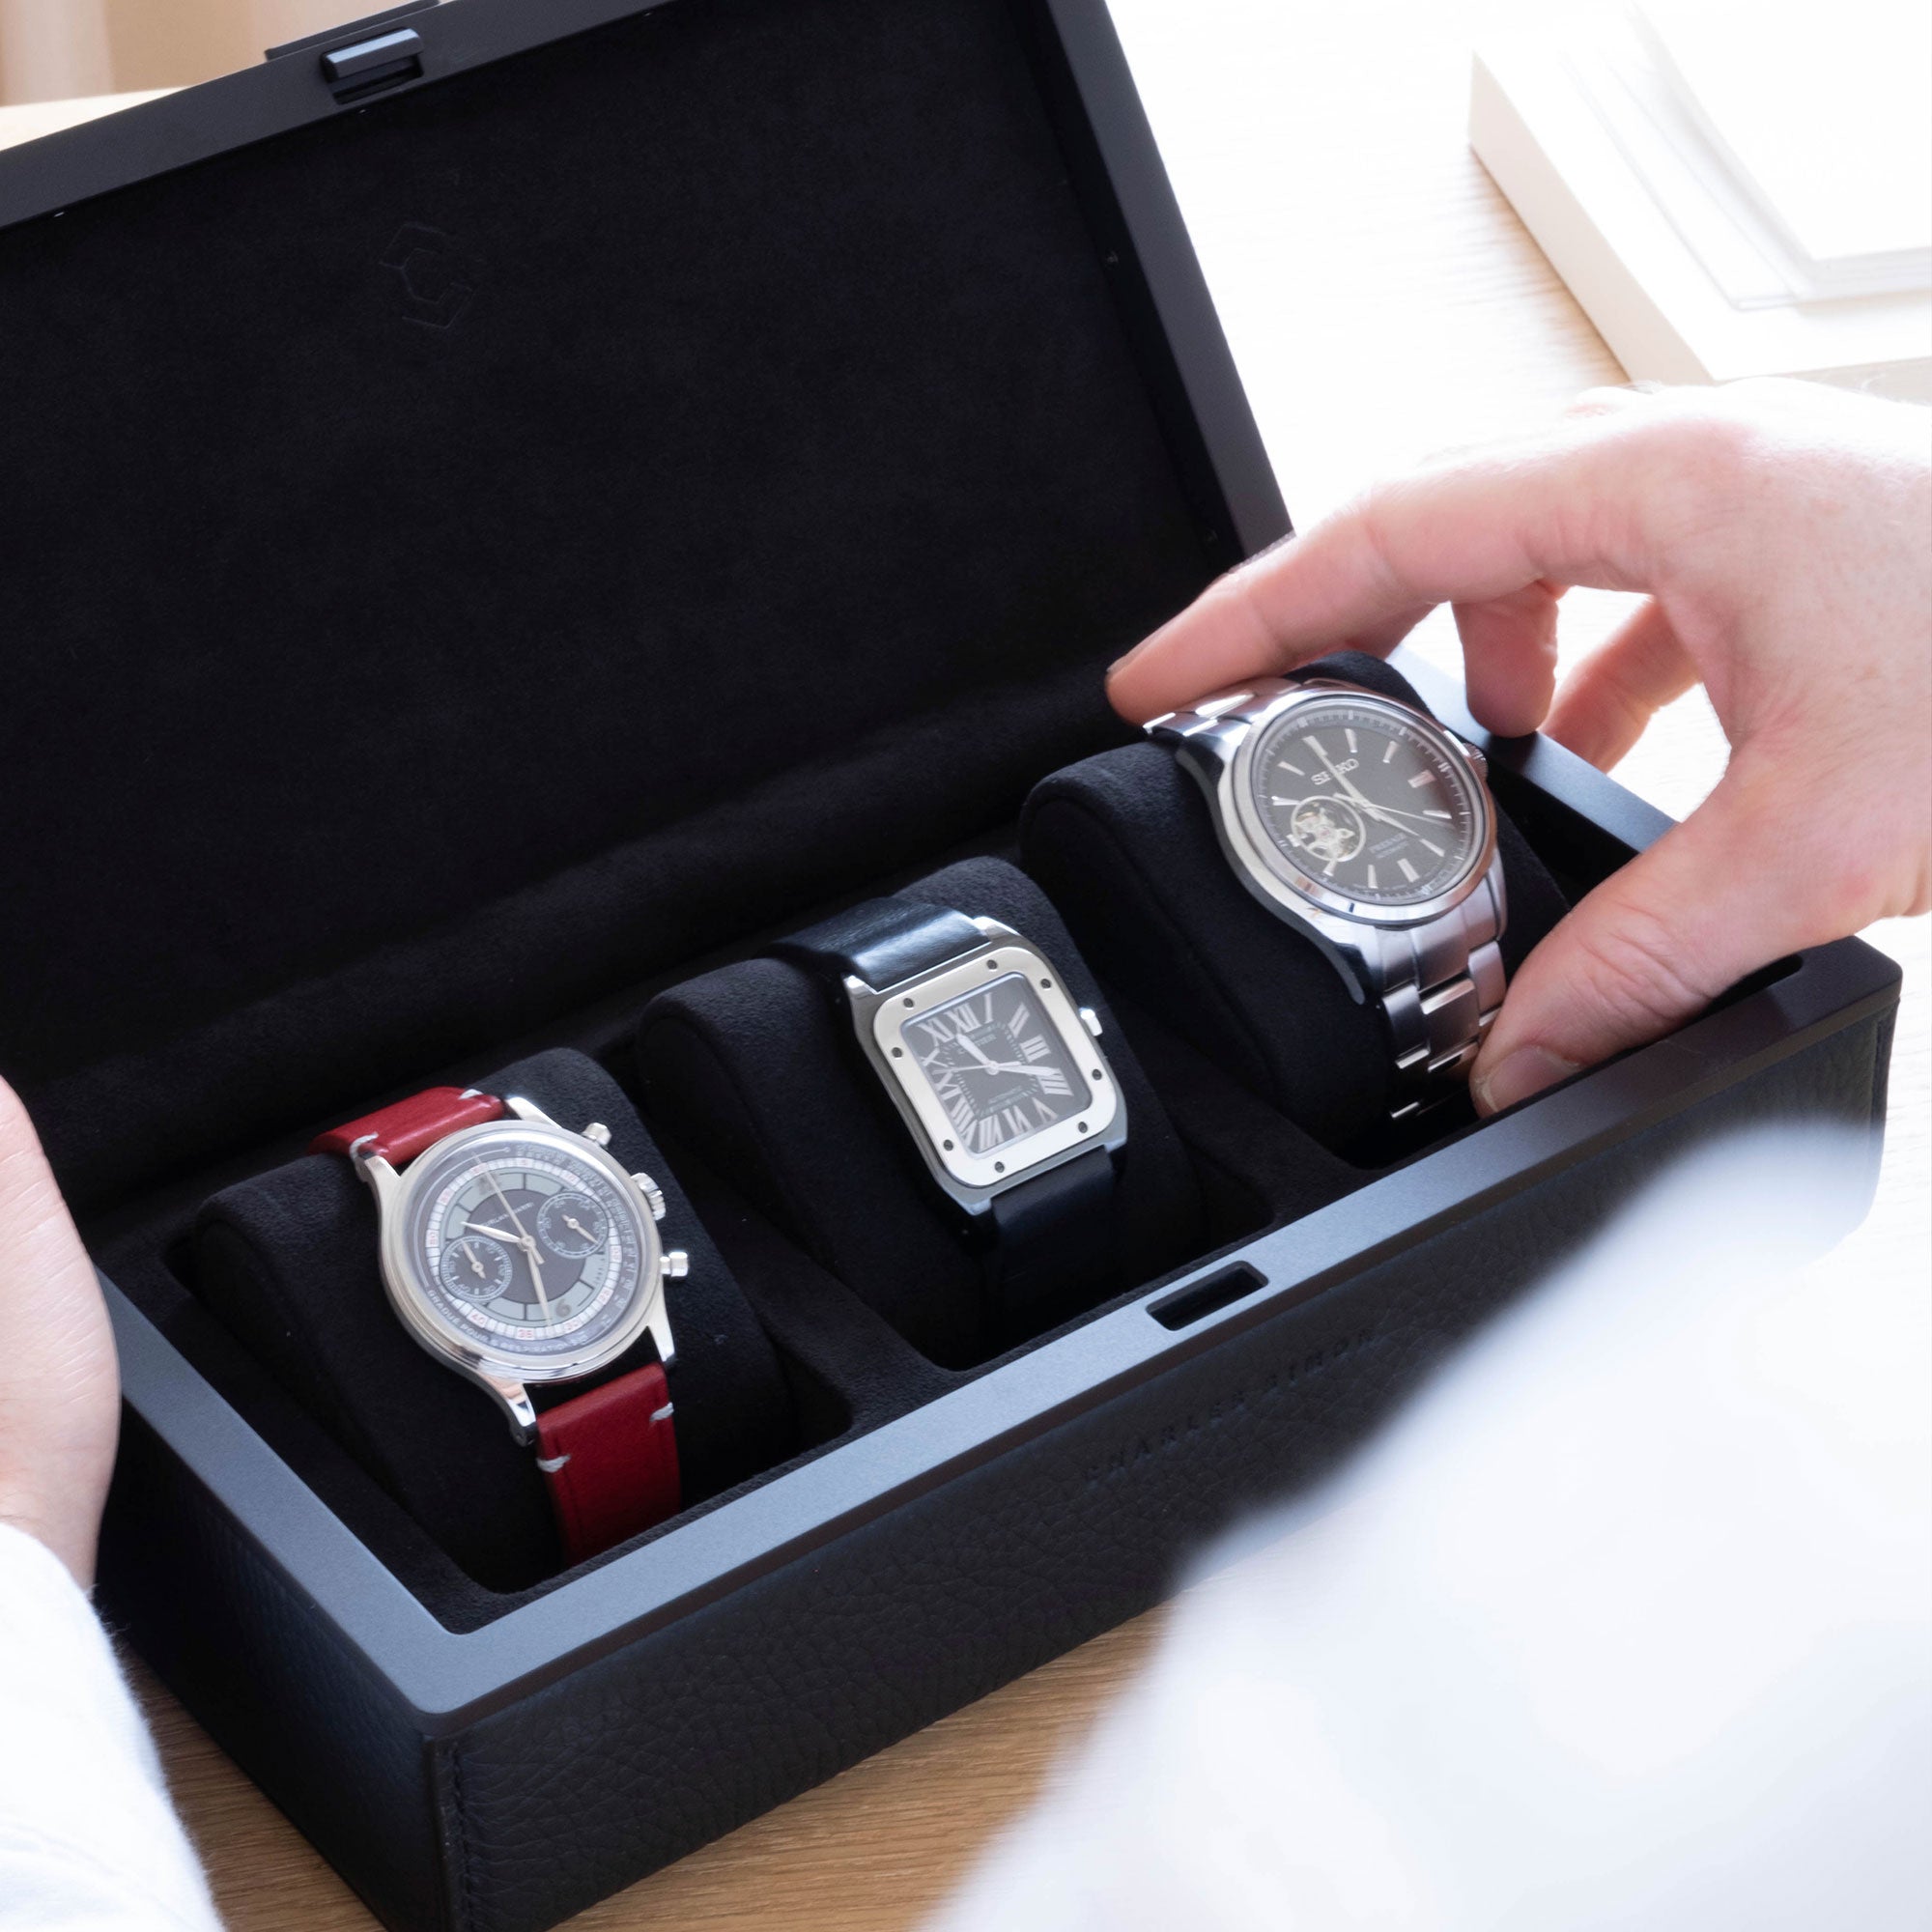 Lifestyle shot of Eaton 3 luxury watch case for 3 watches holding collection of 3 watches, including Furlan Marri, Cartier and Seiko placed on removable Alcantara watch cushions.